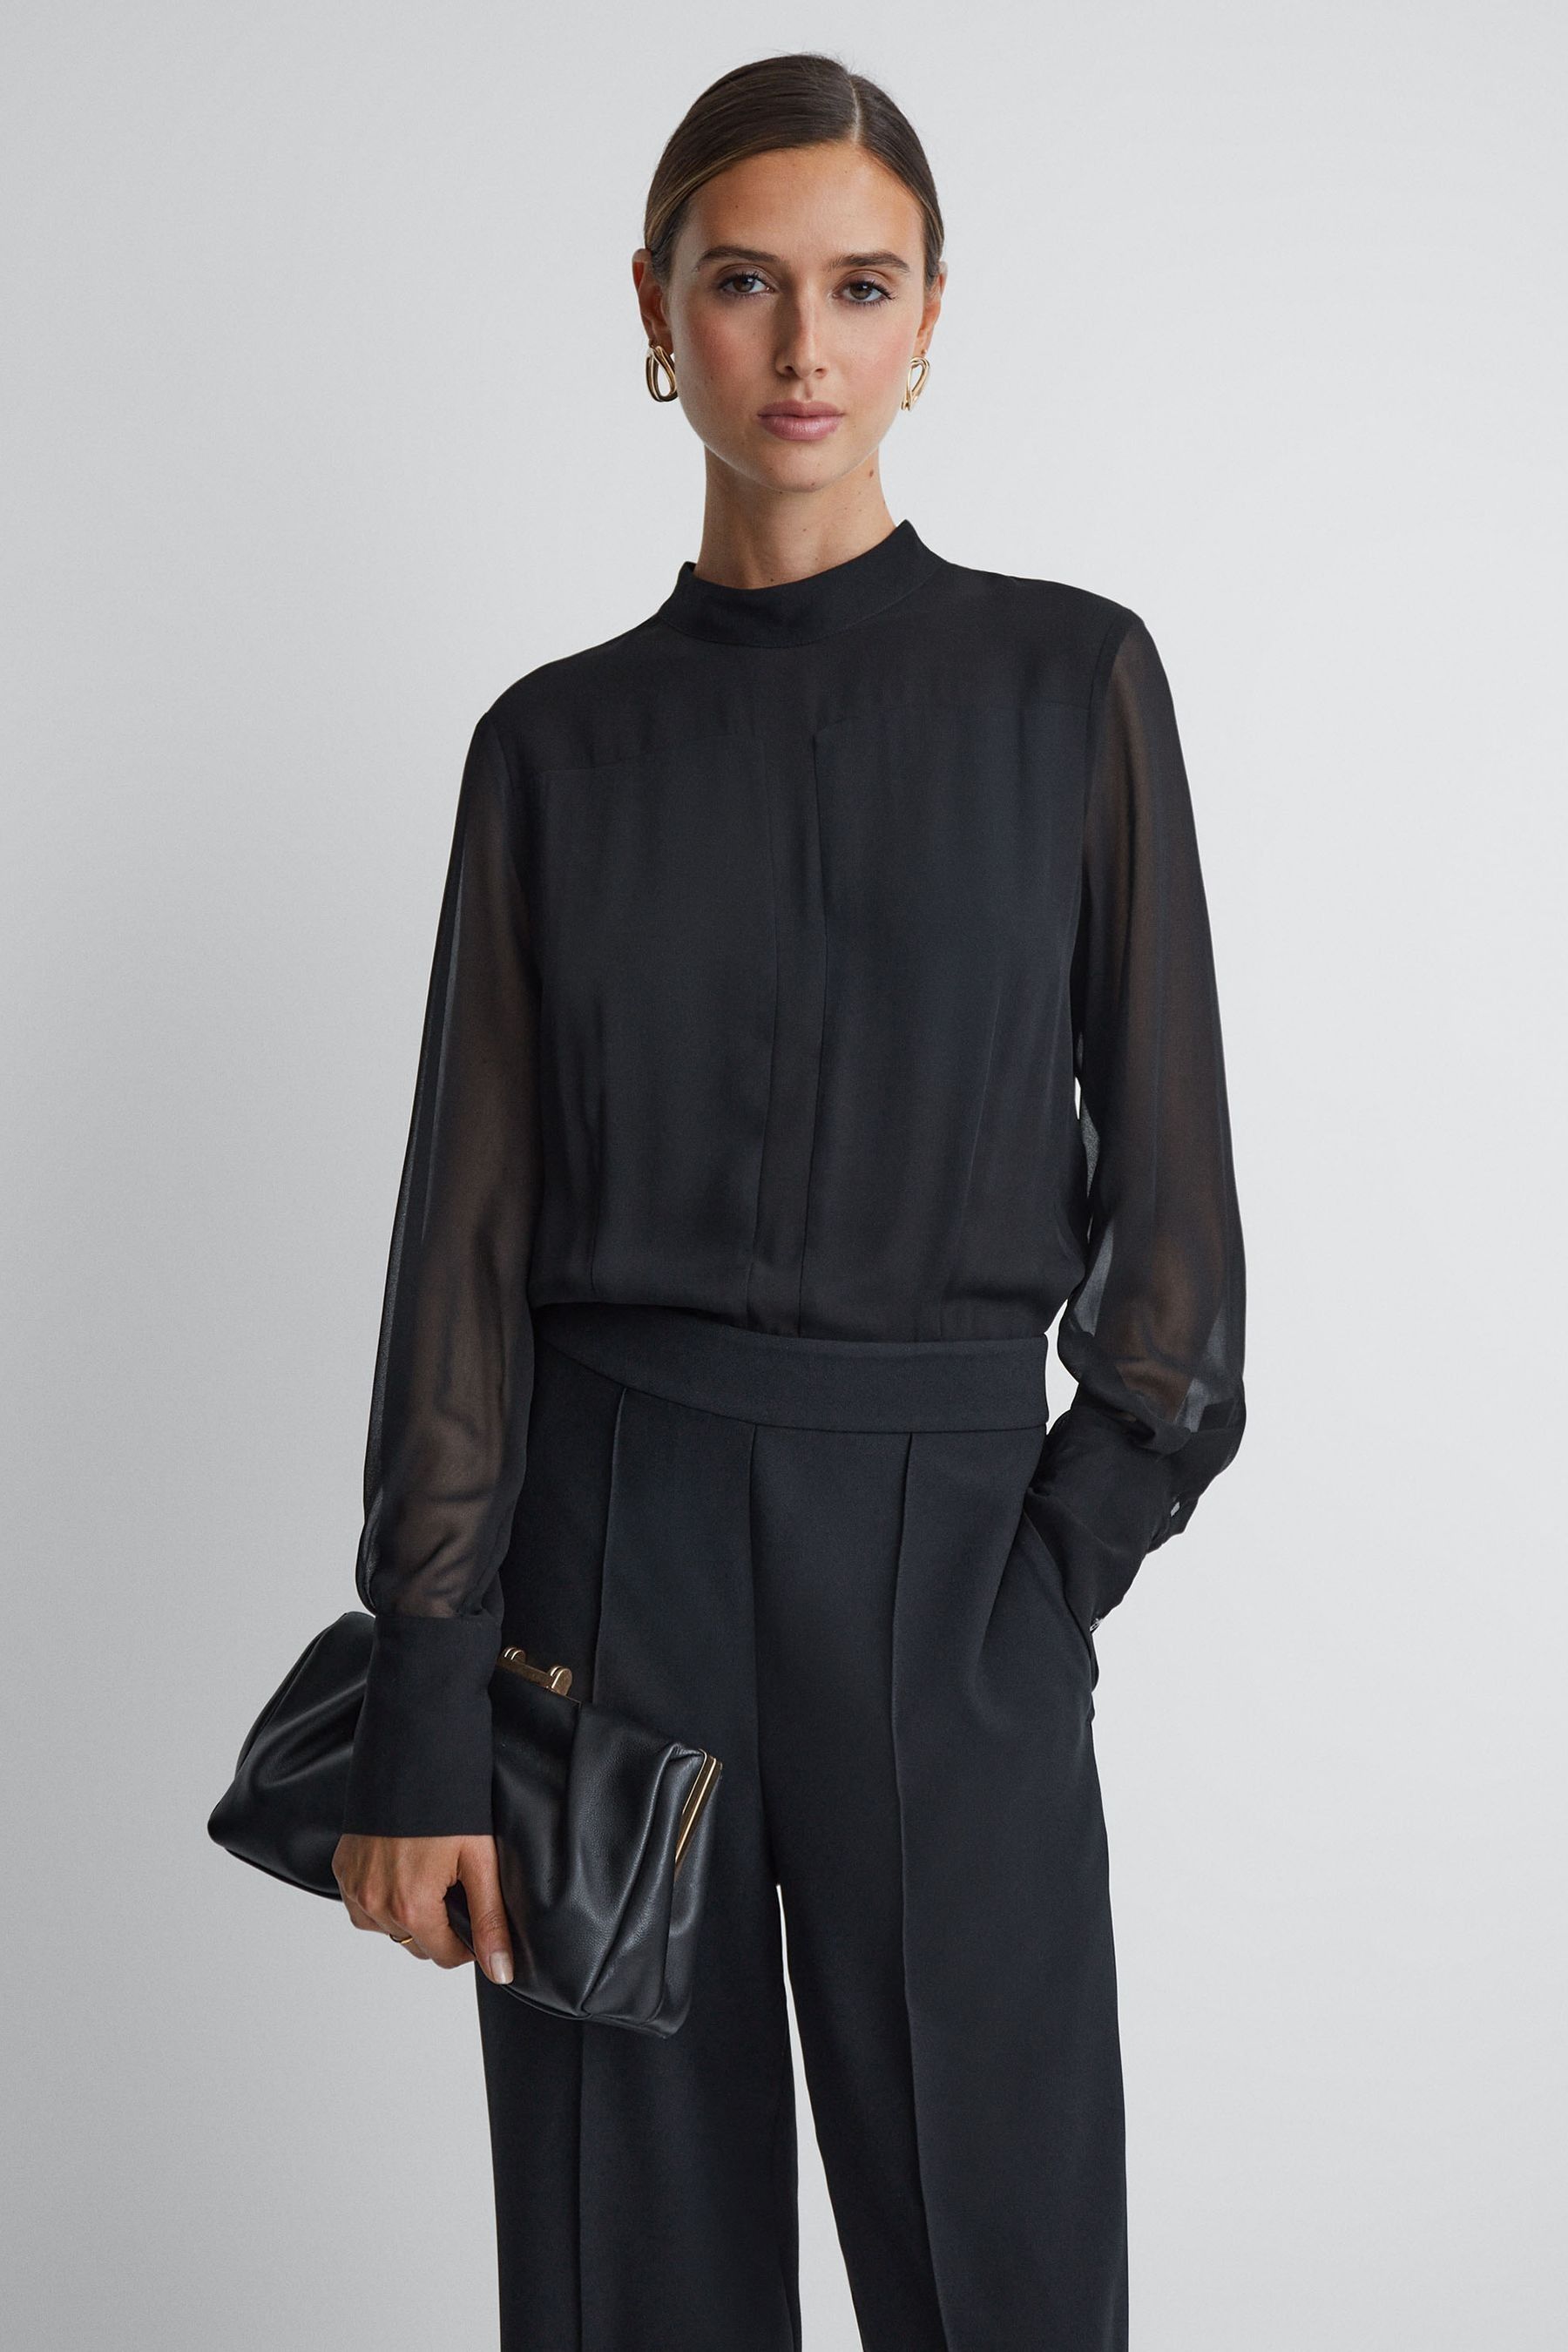 Reiss Magda - Black Sheer Fitted Jumpsuit, Us 4